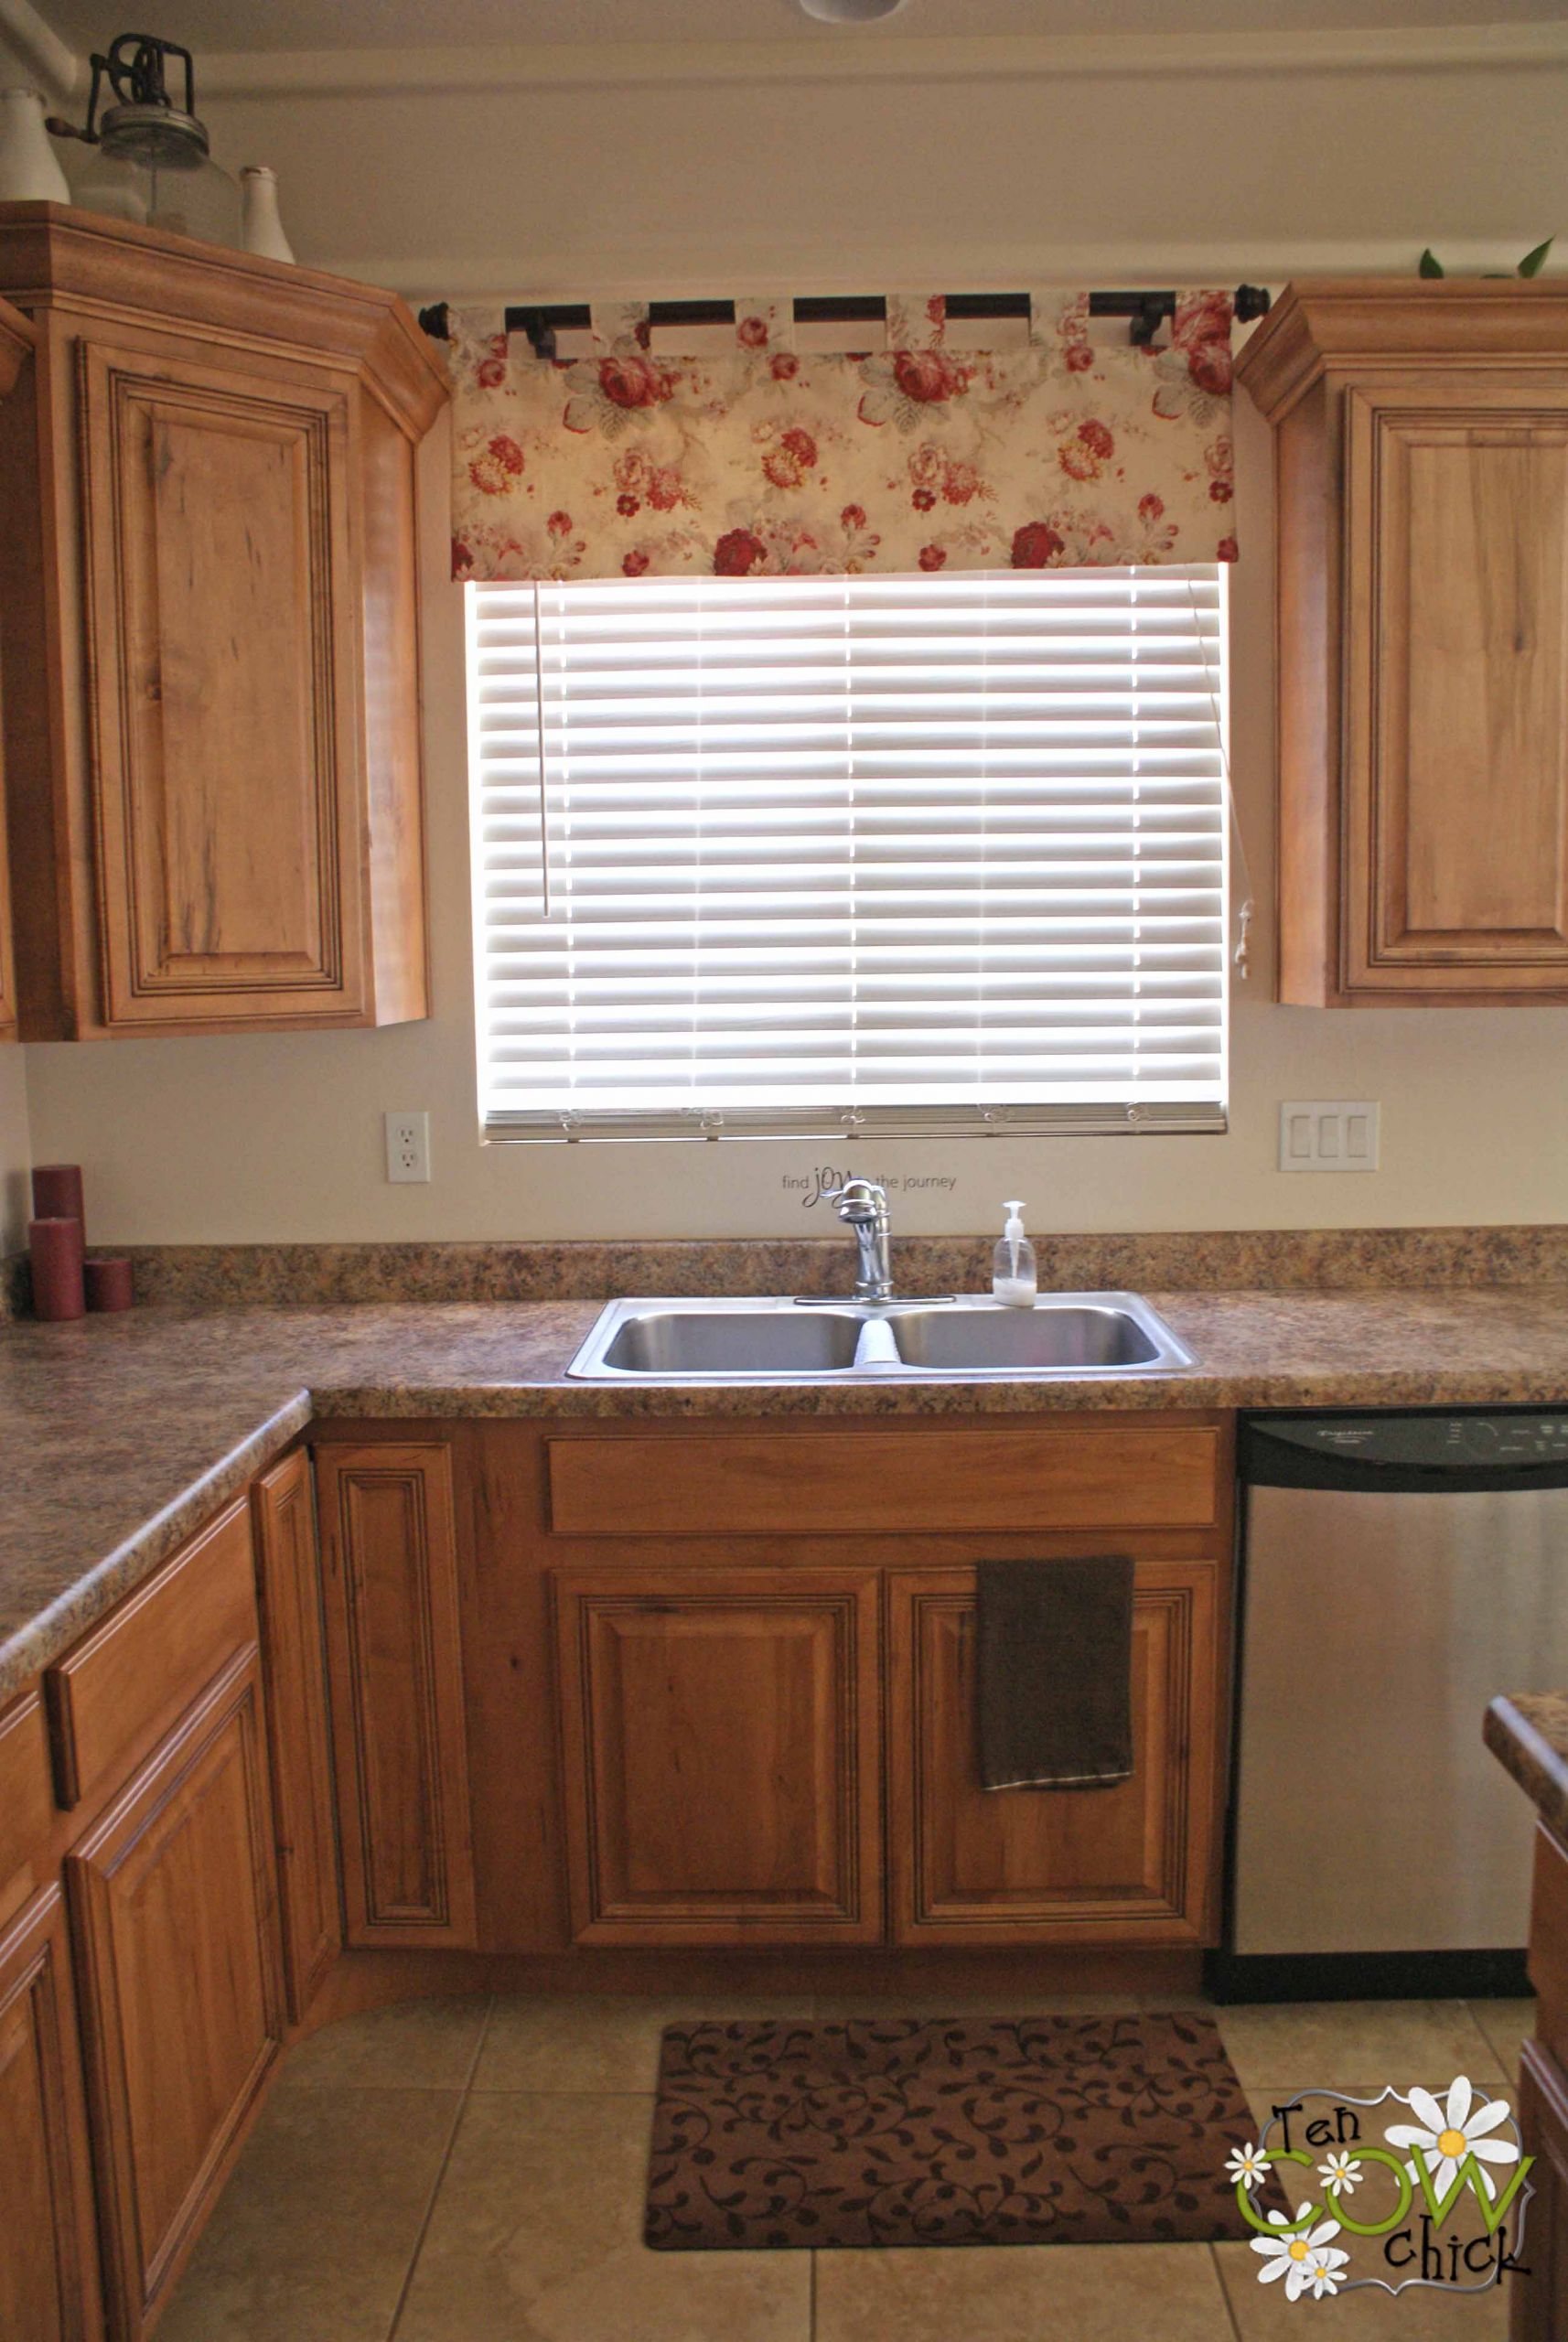 Small Kitchen Window Curtains
 Guide to Choose the Appropriate Kitchen Curtain Ideas